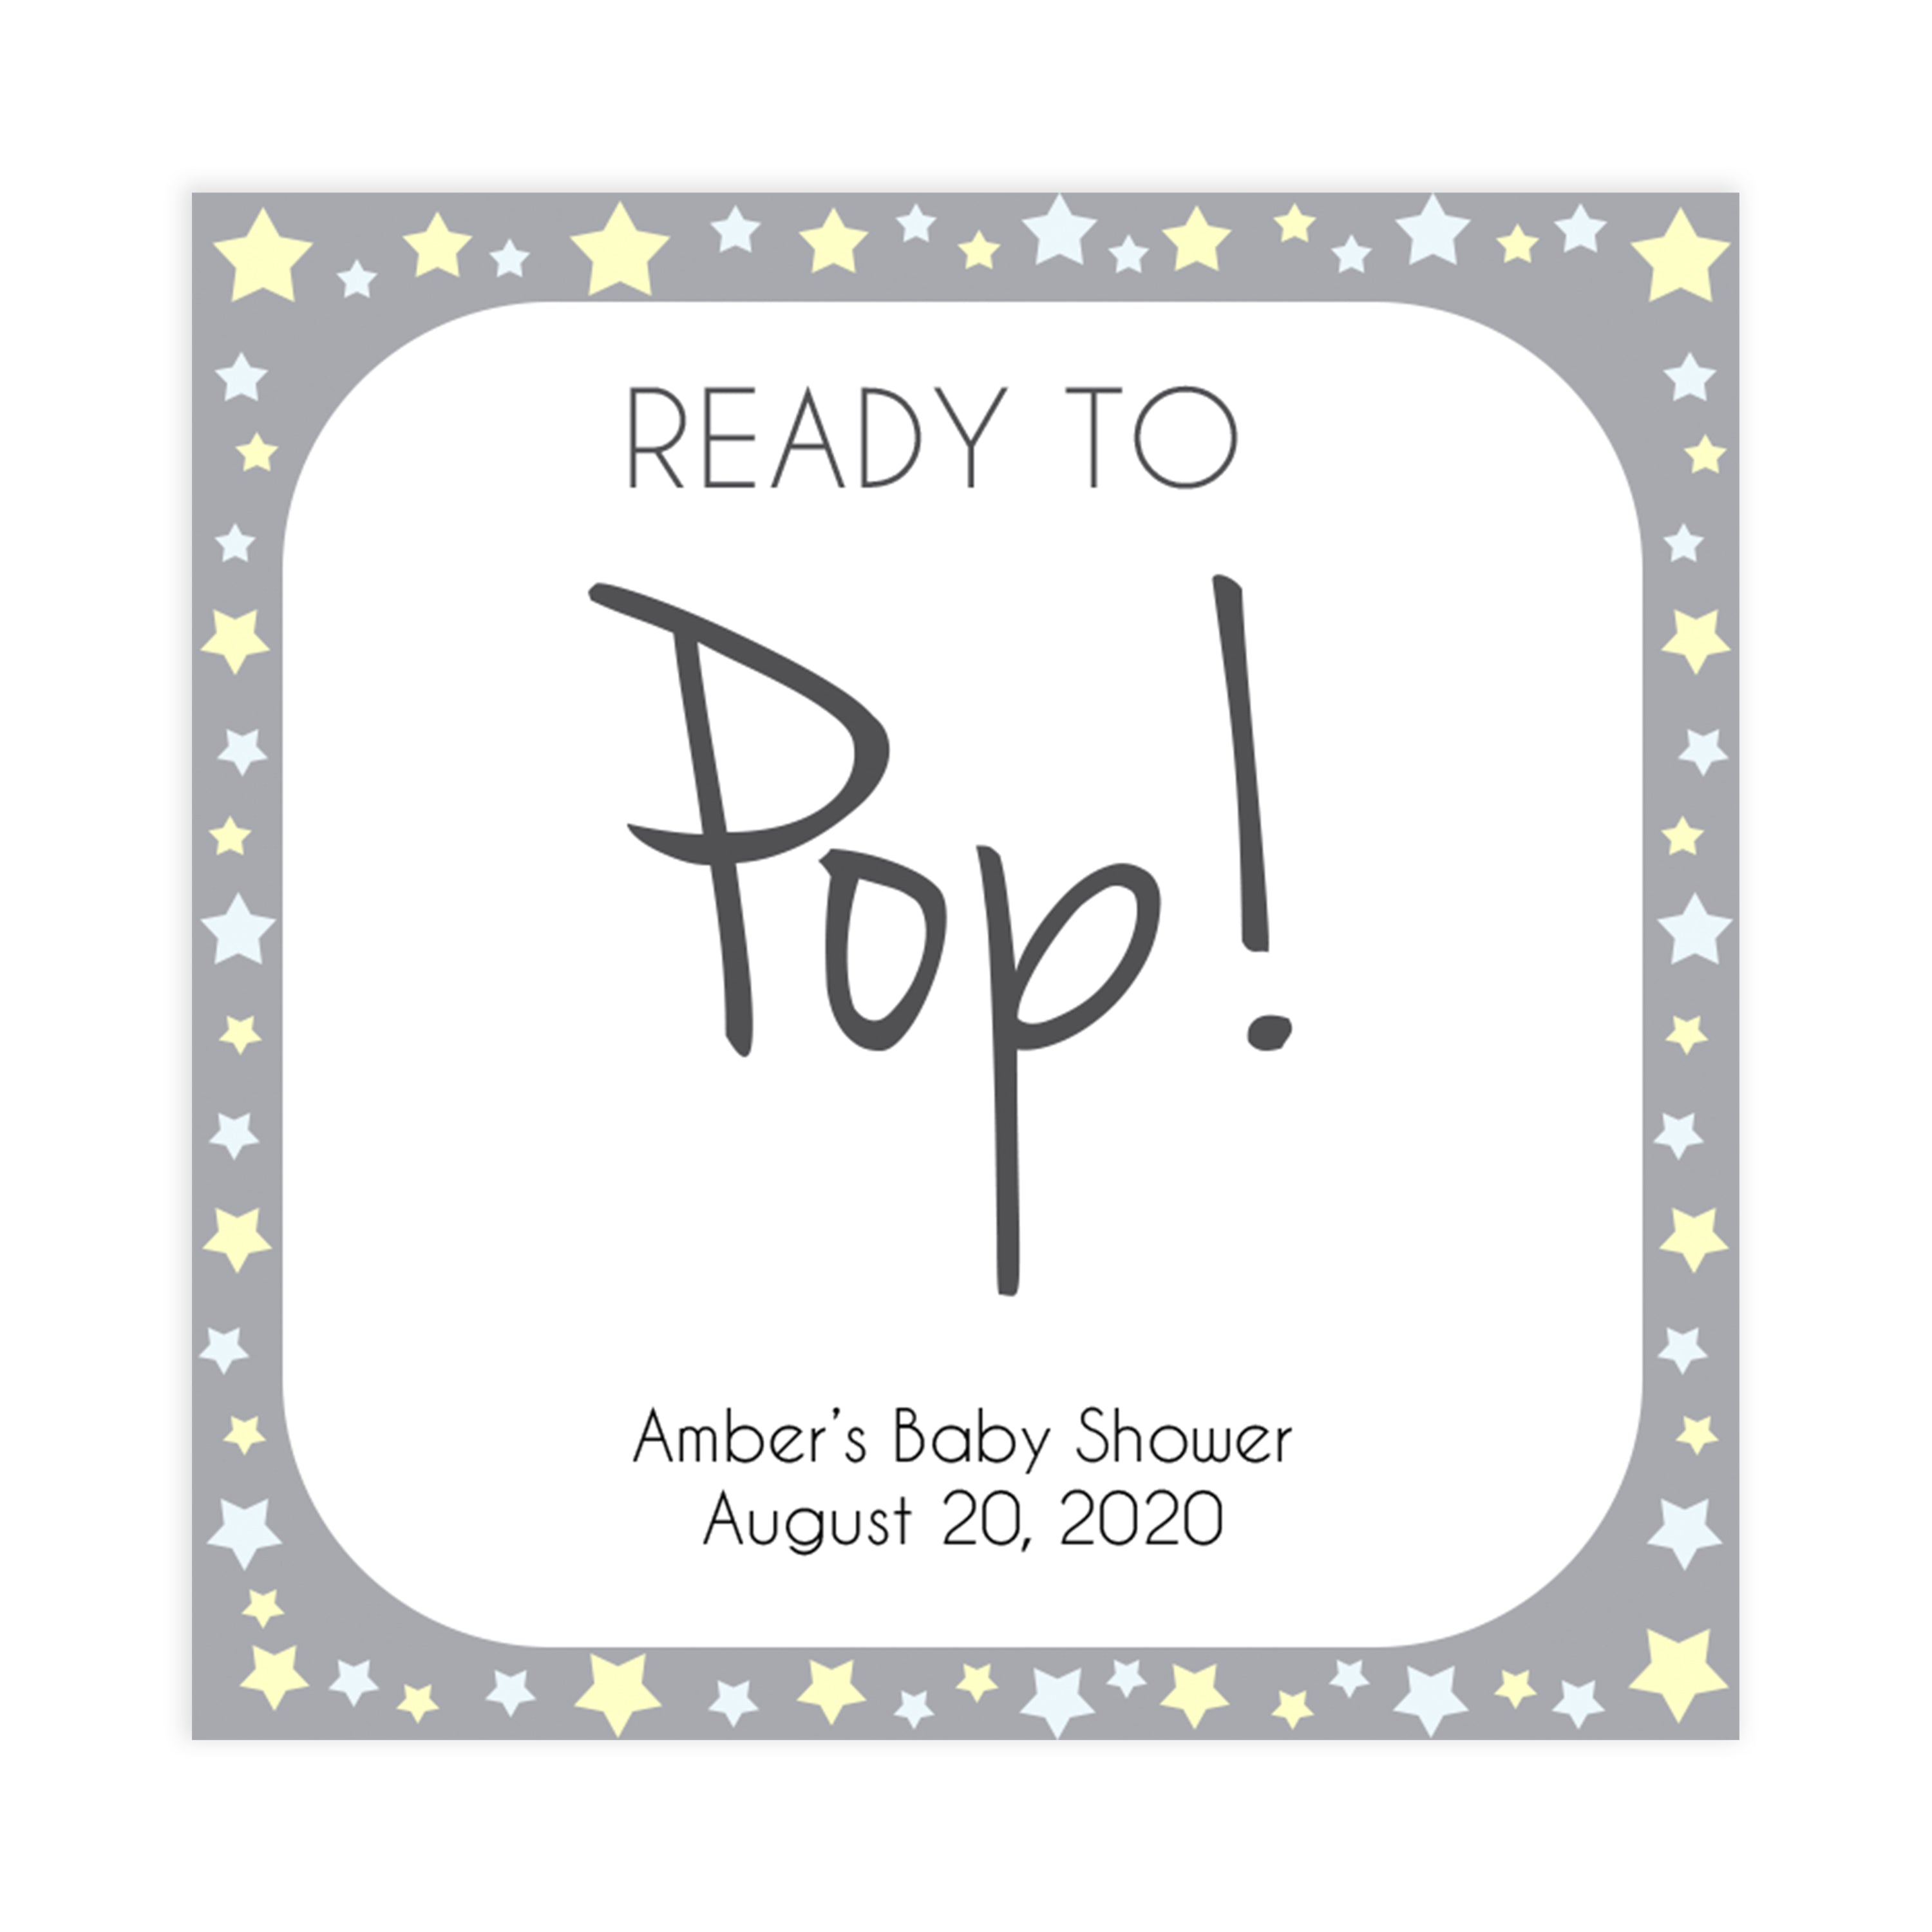 Printable baby signs, baby pop tags, baby shower tags, yellow and grey stars, printable baby shower signs, top baby shower decor, baby printable decor